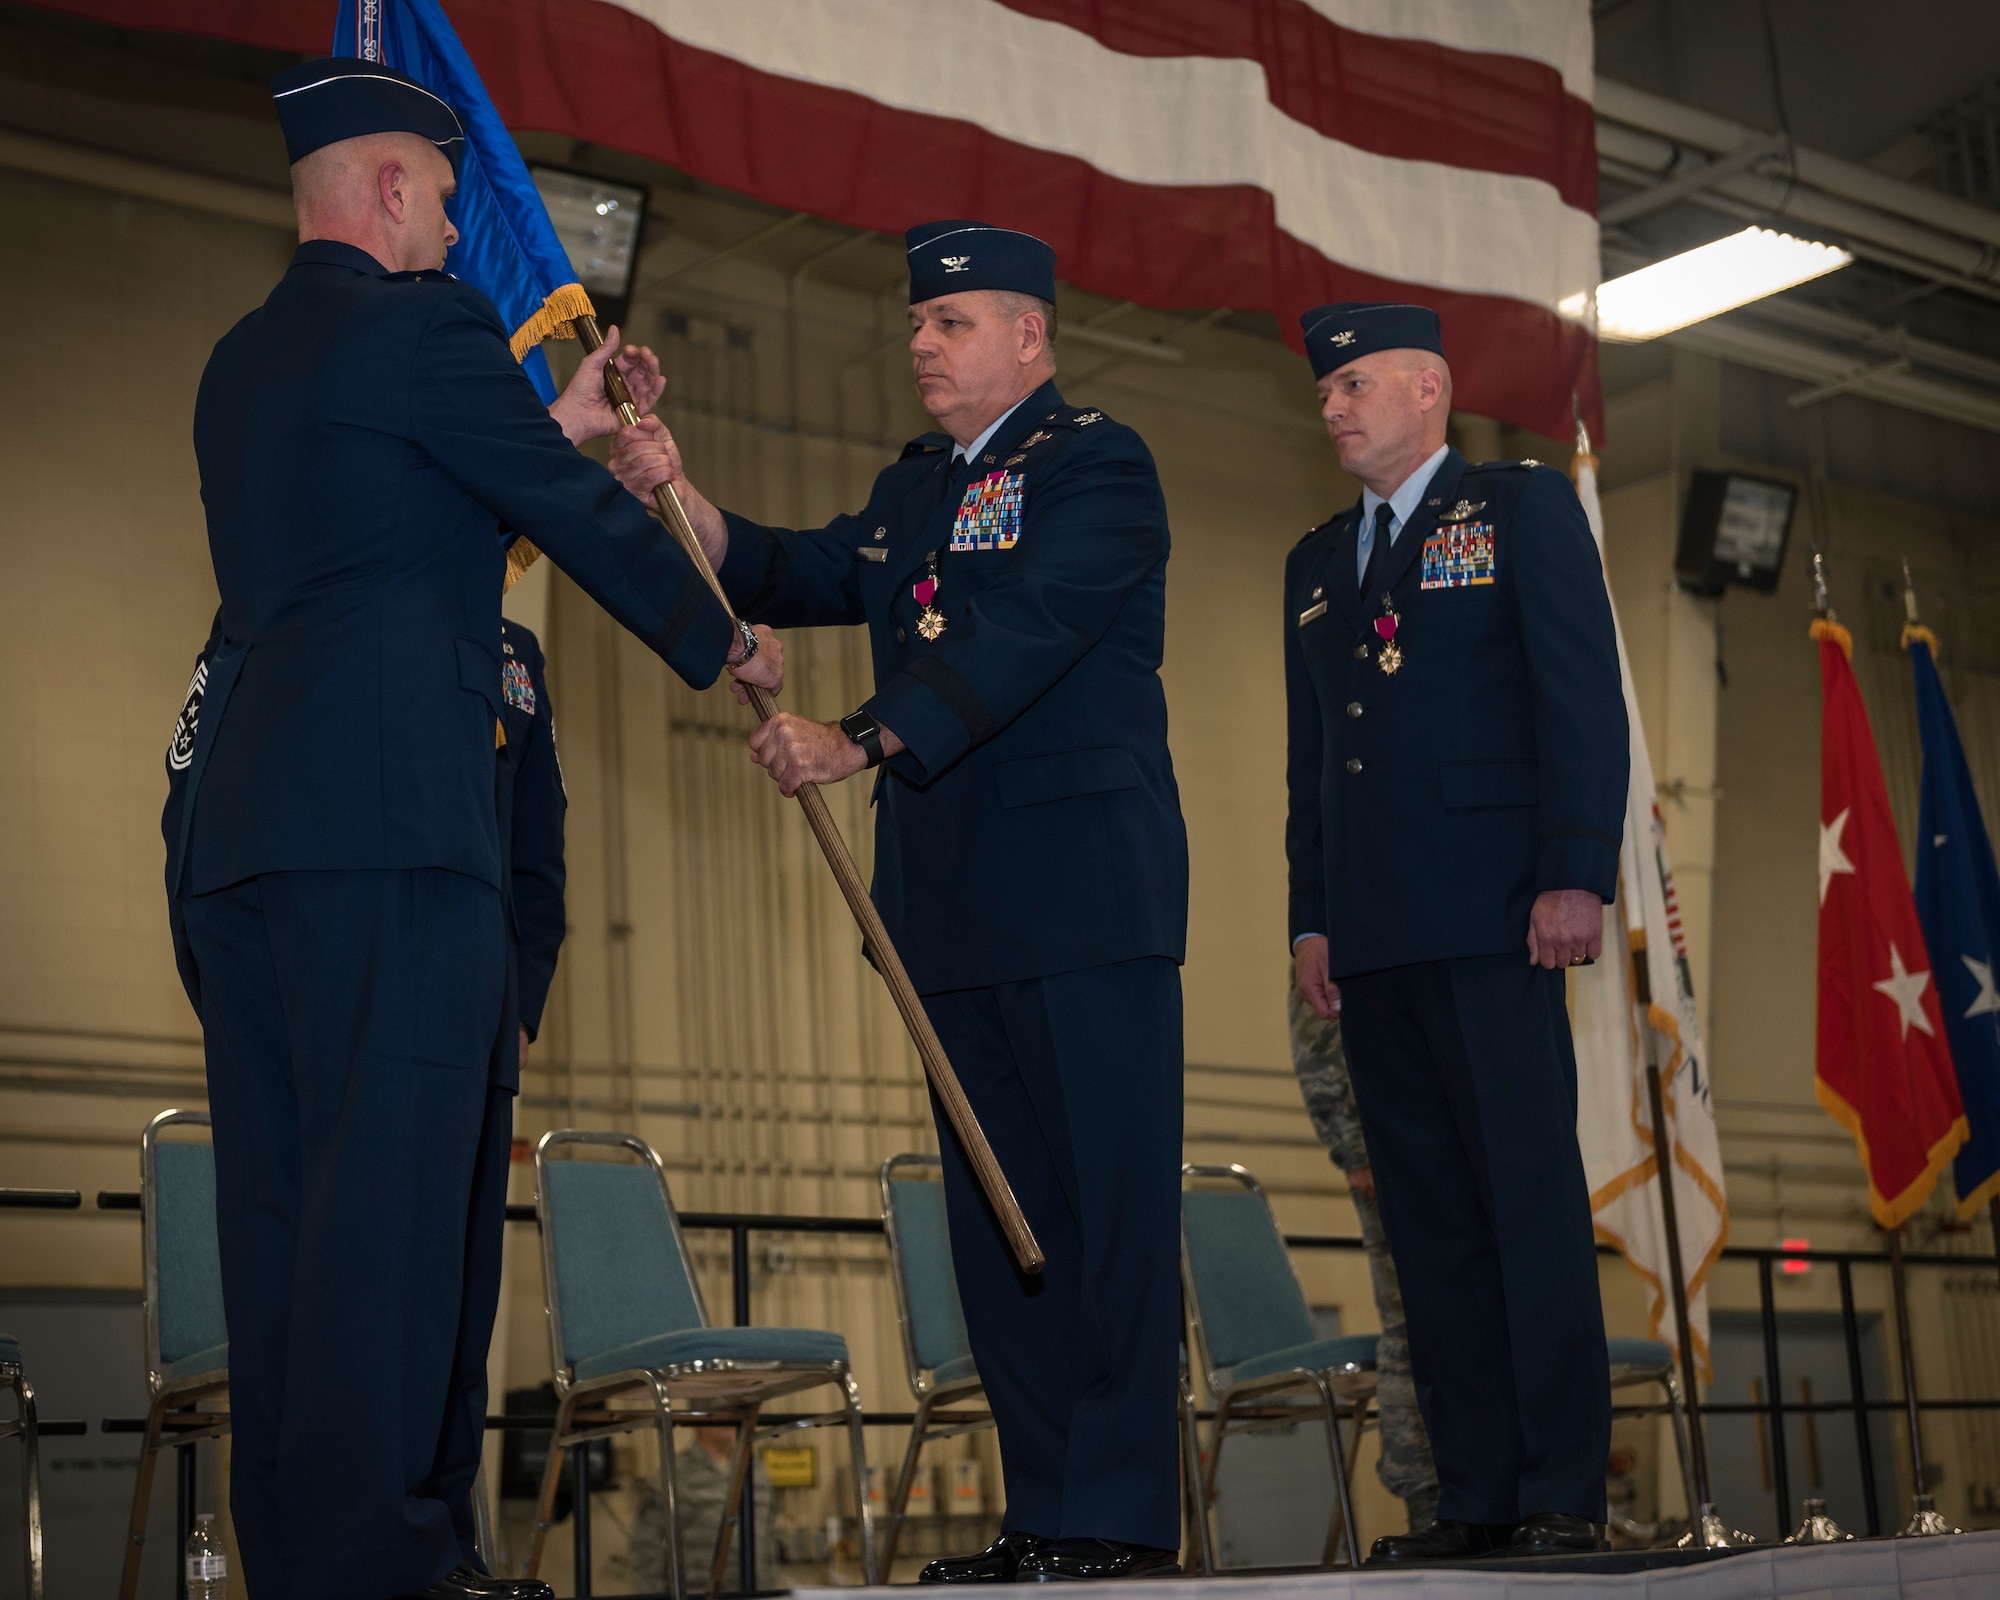 U.S. Air Force Col. William Robertson, center, the commander of the 182nd Airlift Wing, Illinois Air National Guard, relinquishes command to Maj. Gen. Ron Paul, the assistant adjutant general – Air of the Illinois National Guard, during a change of command ceremony in Peoria, Ill., Nov. 4, 2017. Col. Daniel McDonough, right, replaced Robertson, who became the chief of staff for the Illinois Air National Guard upon his promotion to brigadier general during the ceremony. (U.S. Air National Guard photo by Tech. Sgt. Lealan Buehrer)